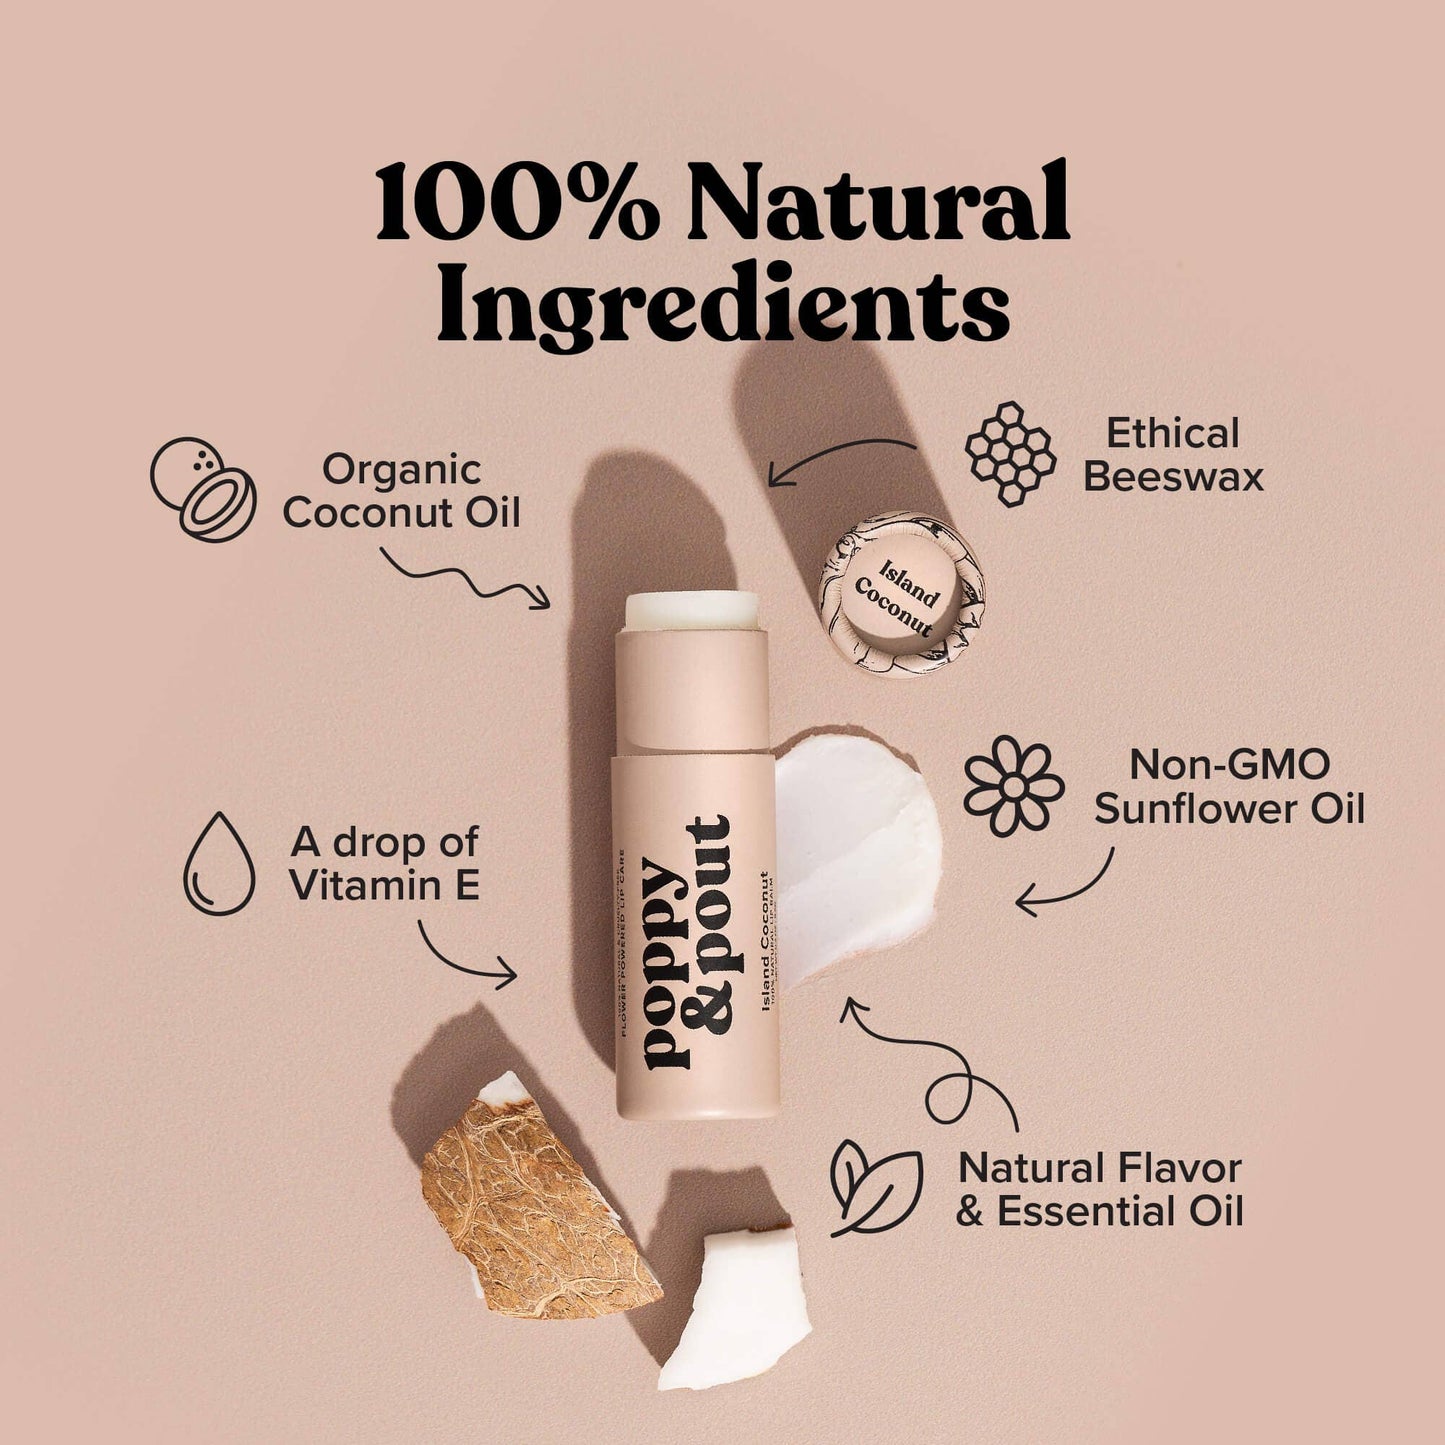 Poppy & Pout - Lip Balm, Island Coconut  Poppy & Pout   -better made easy-eco-friendly-sustainable-gifting